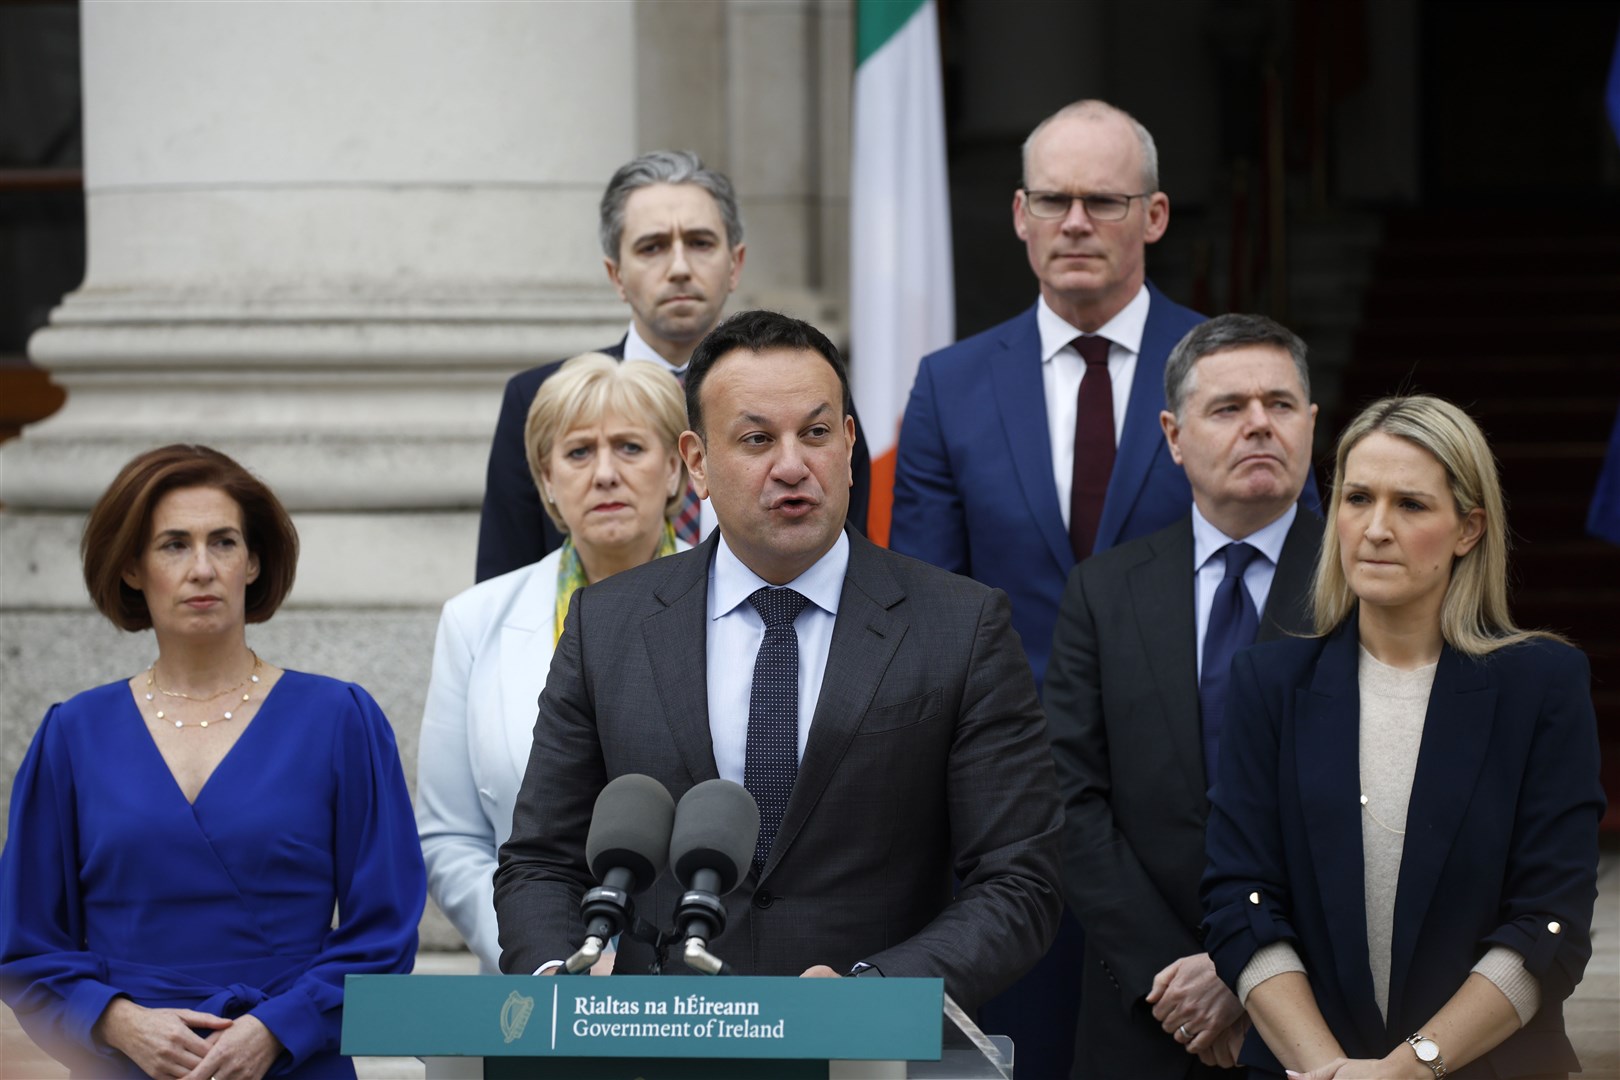 Leo Varadkar flanked by supporters speaking to the media at Government Buildings in Dublin (Nick Bradshaw/PA)